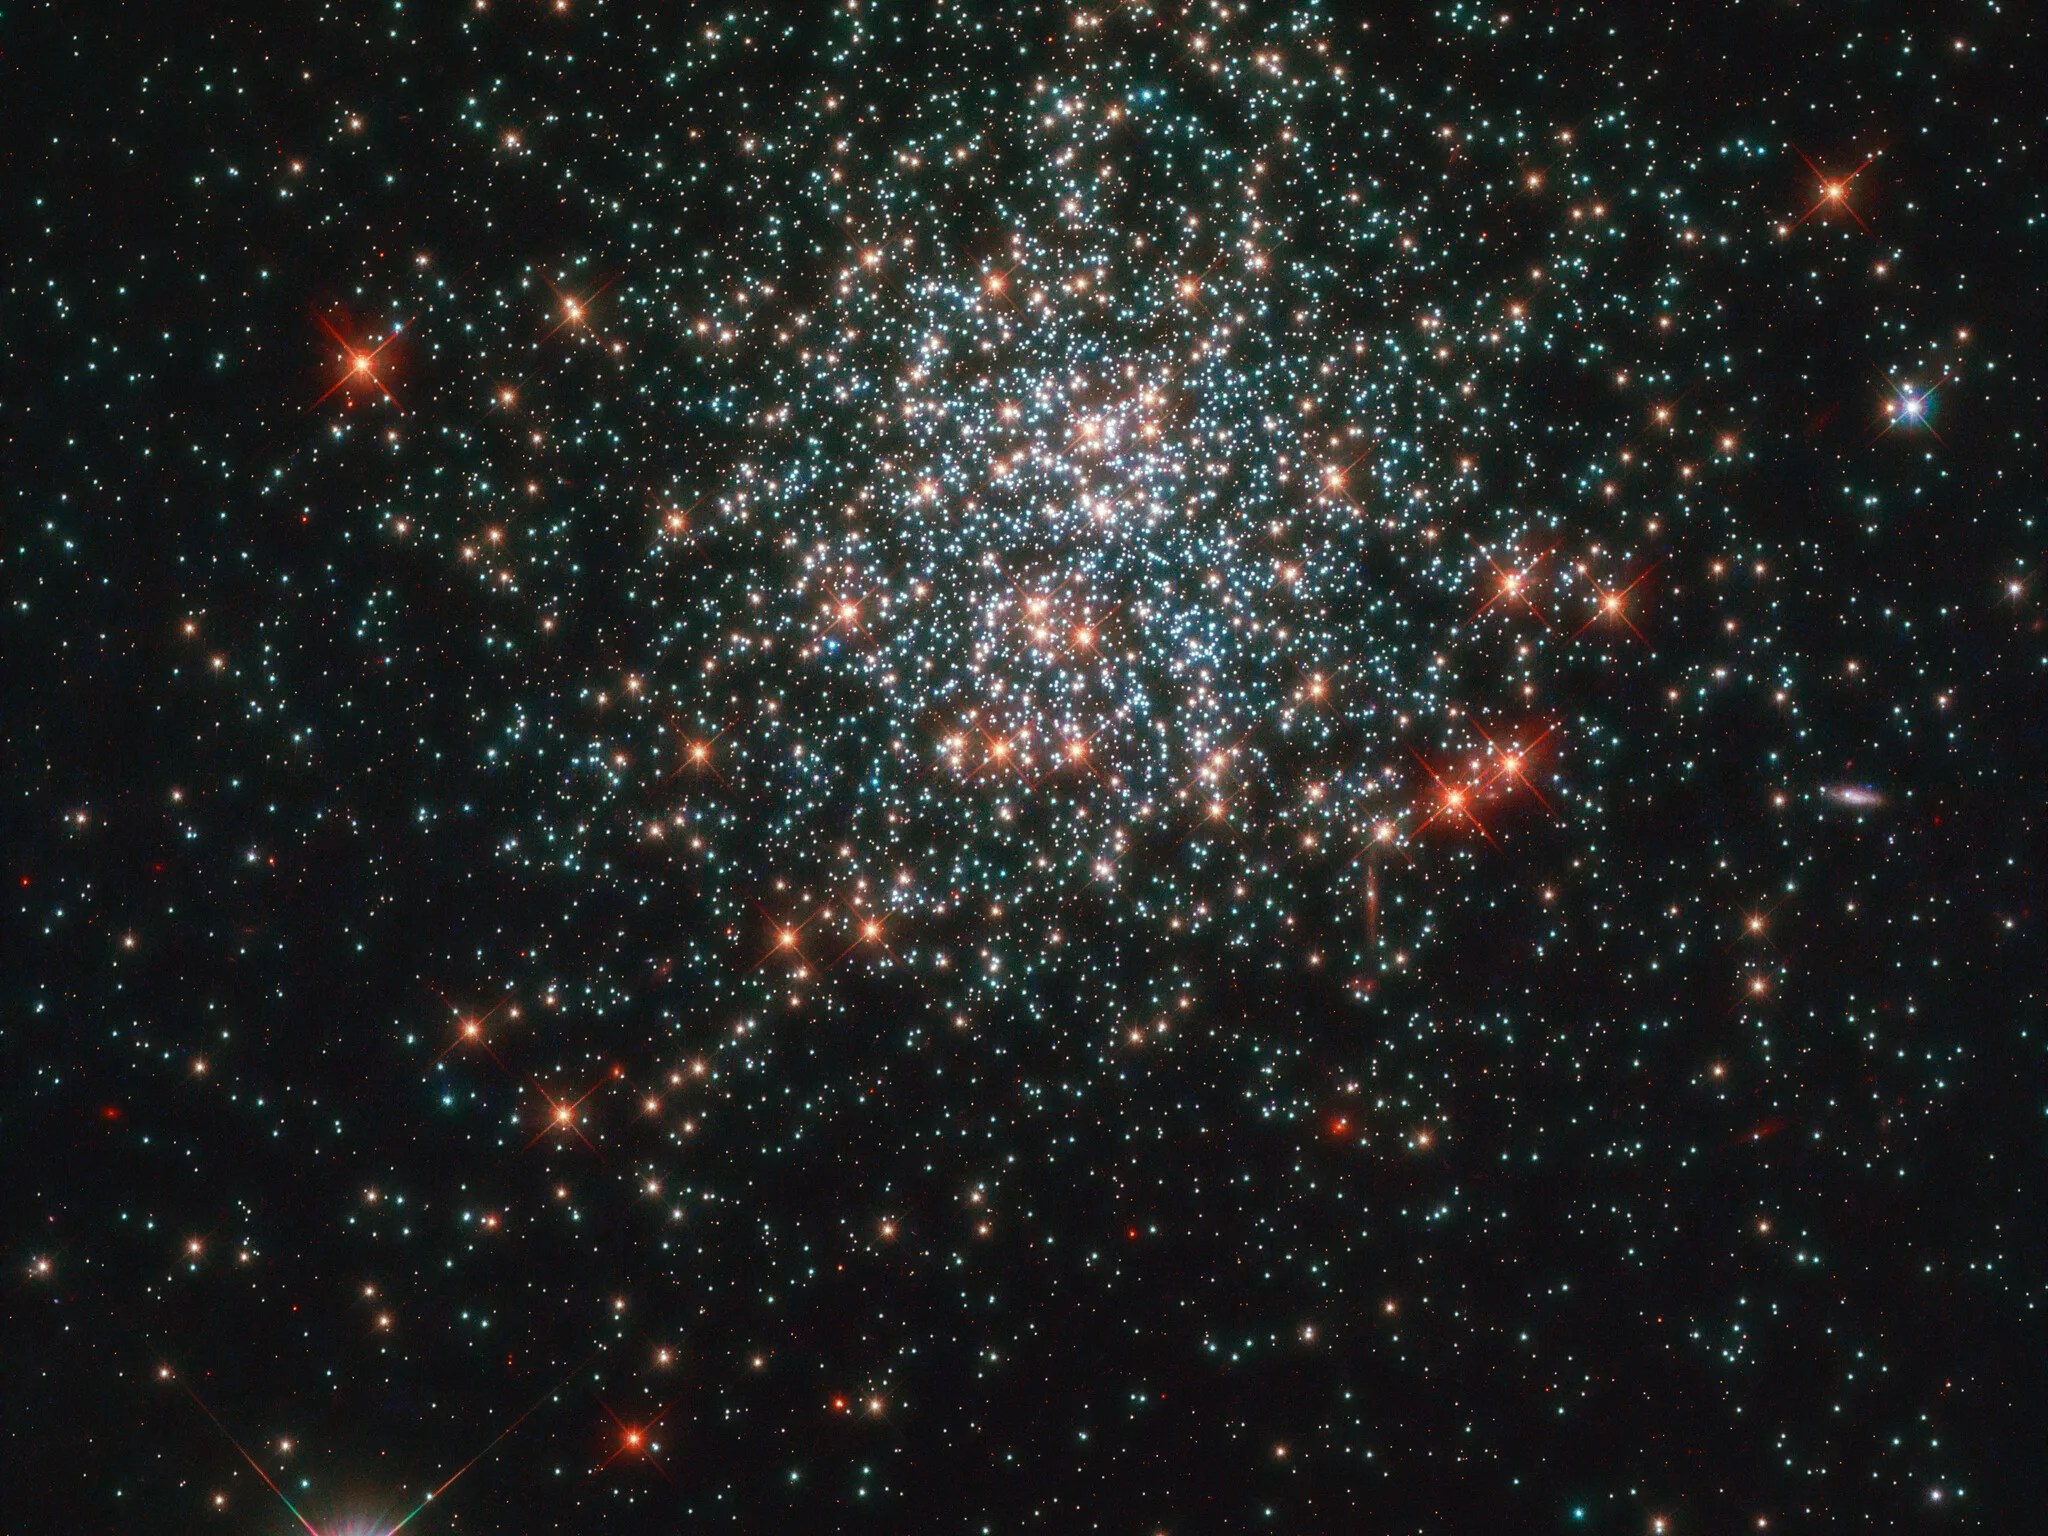 Bright specks of star cluster ngc 2203 against black backdrop of space